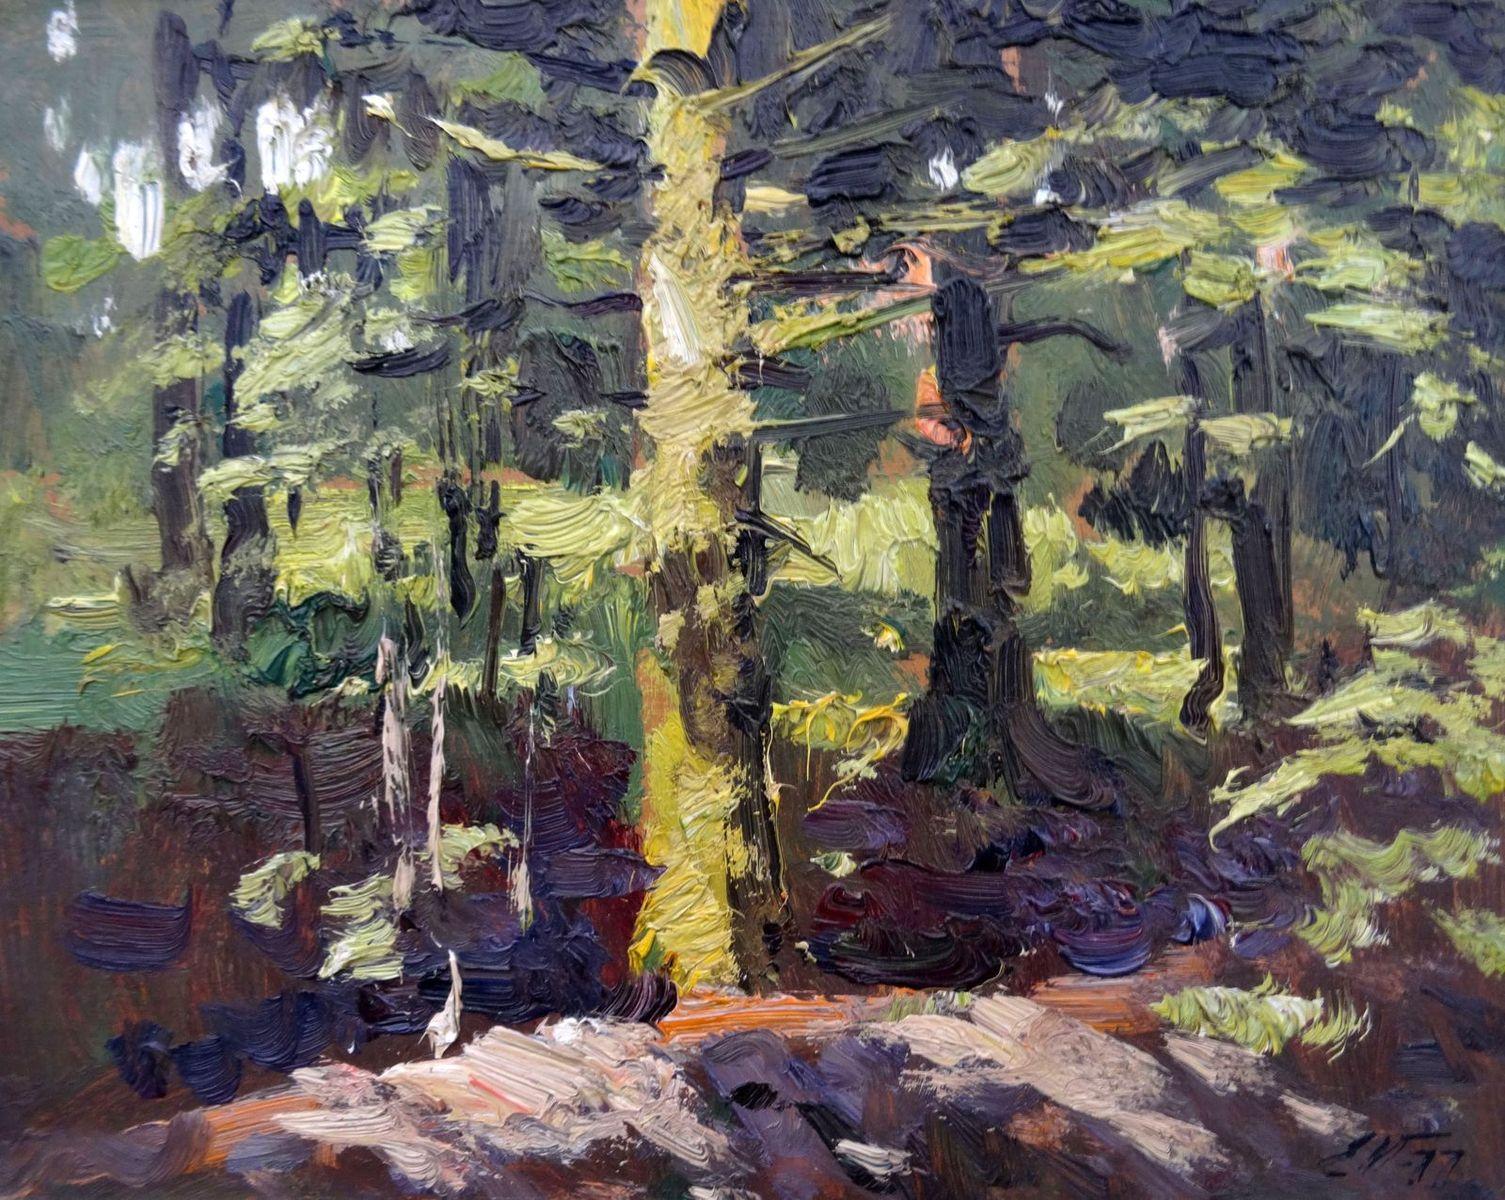 Edgars Vinters Landscape Art - Sunny day in the forest. 1977, cardboard, oil, 21.5x26 cm